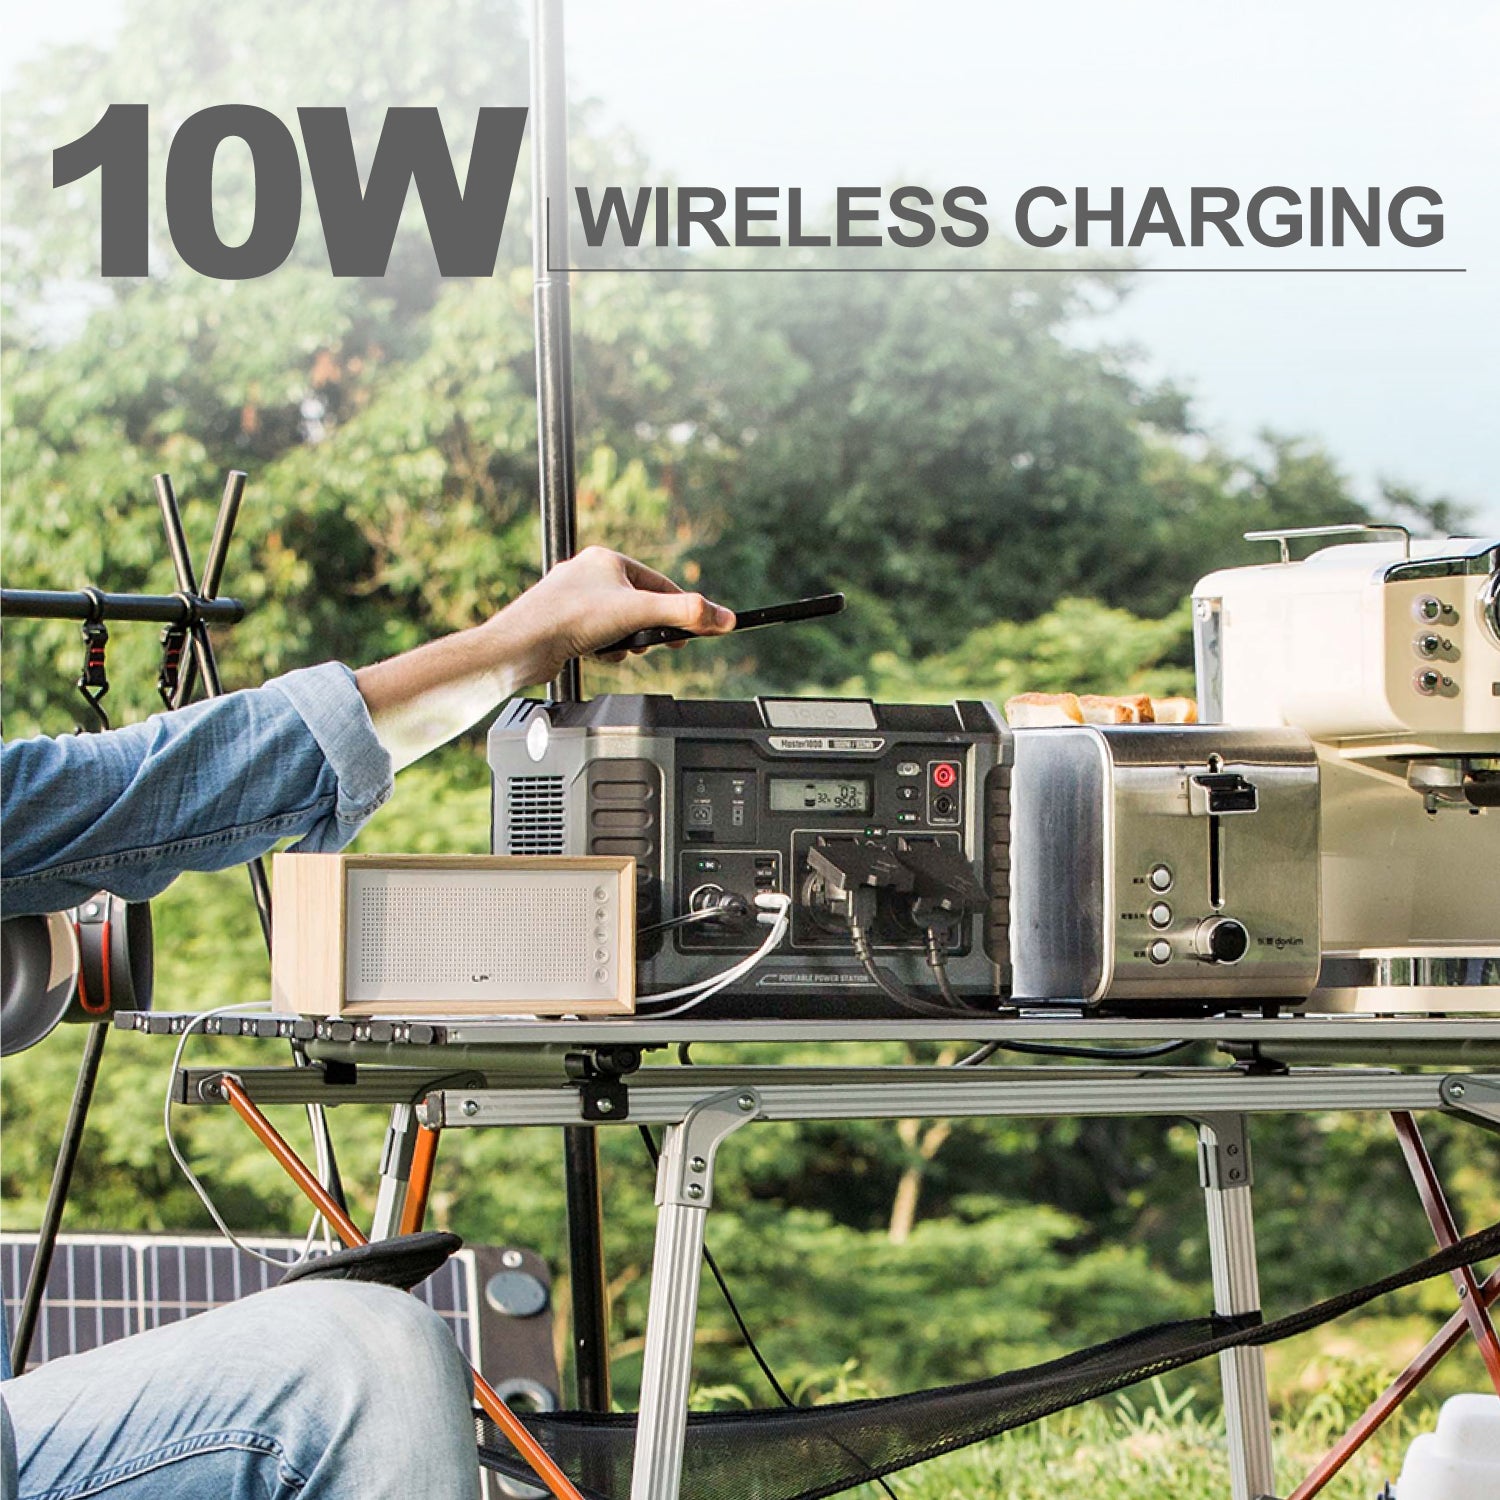 TogoPower Launched The World's Lightest 1000W Portable Power Station –  Togopower